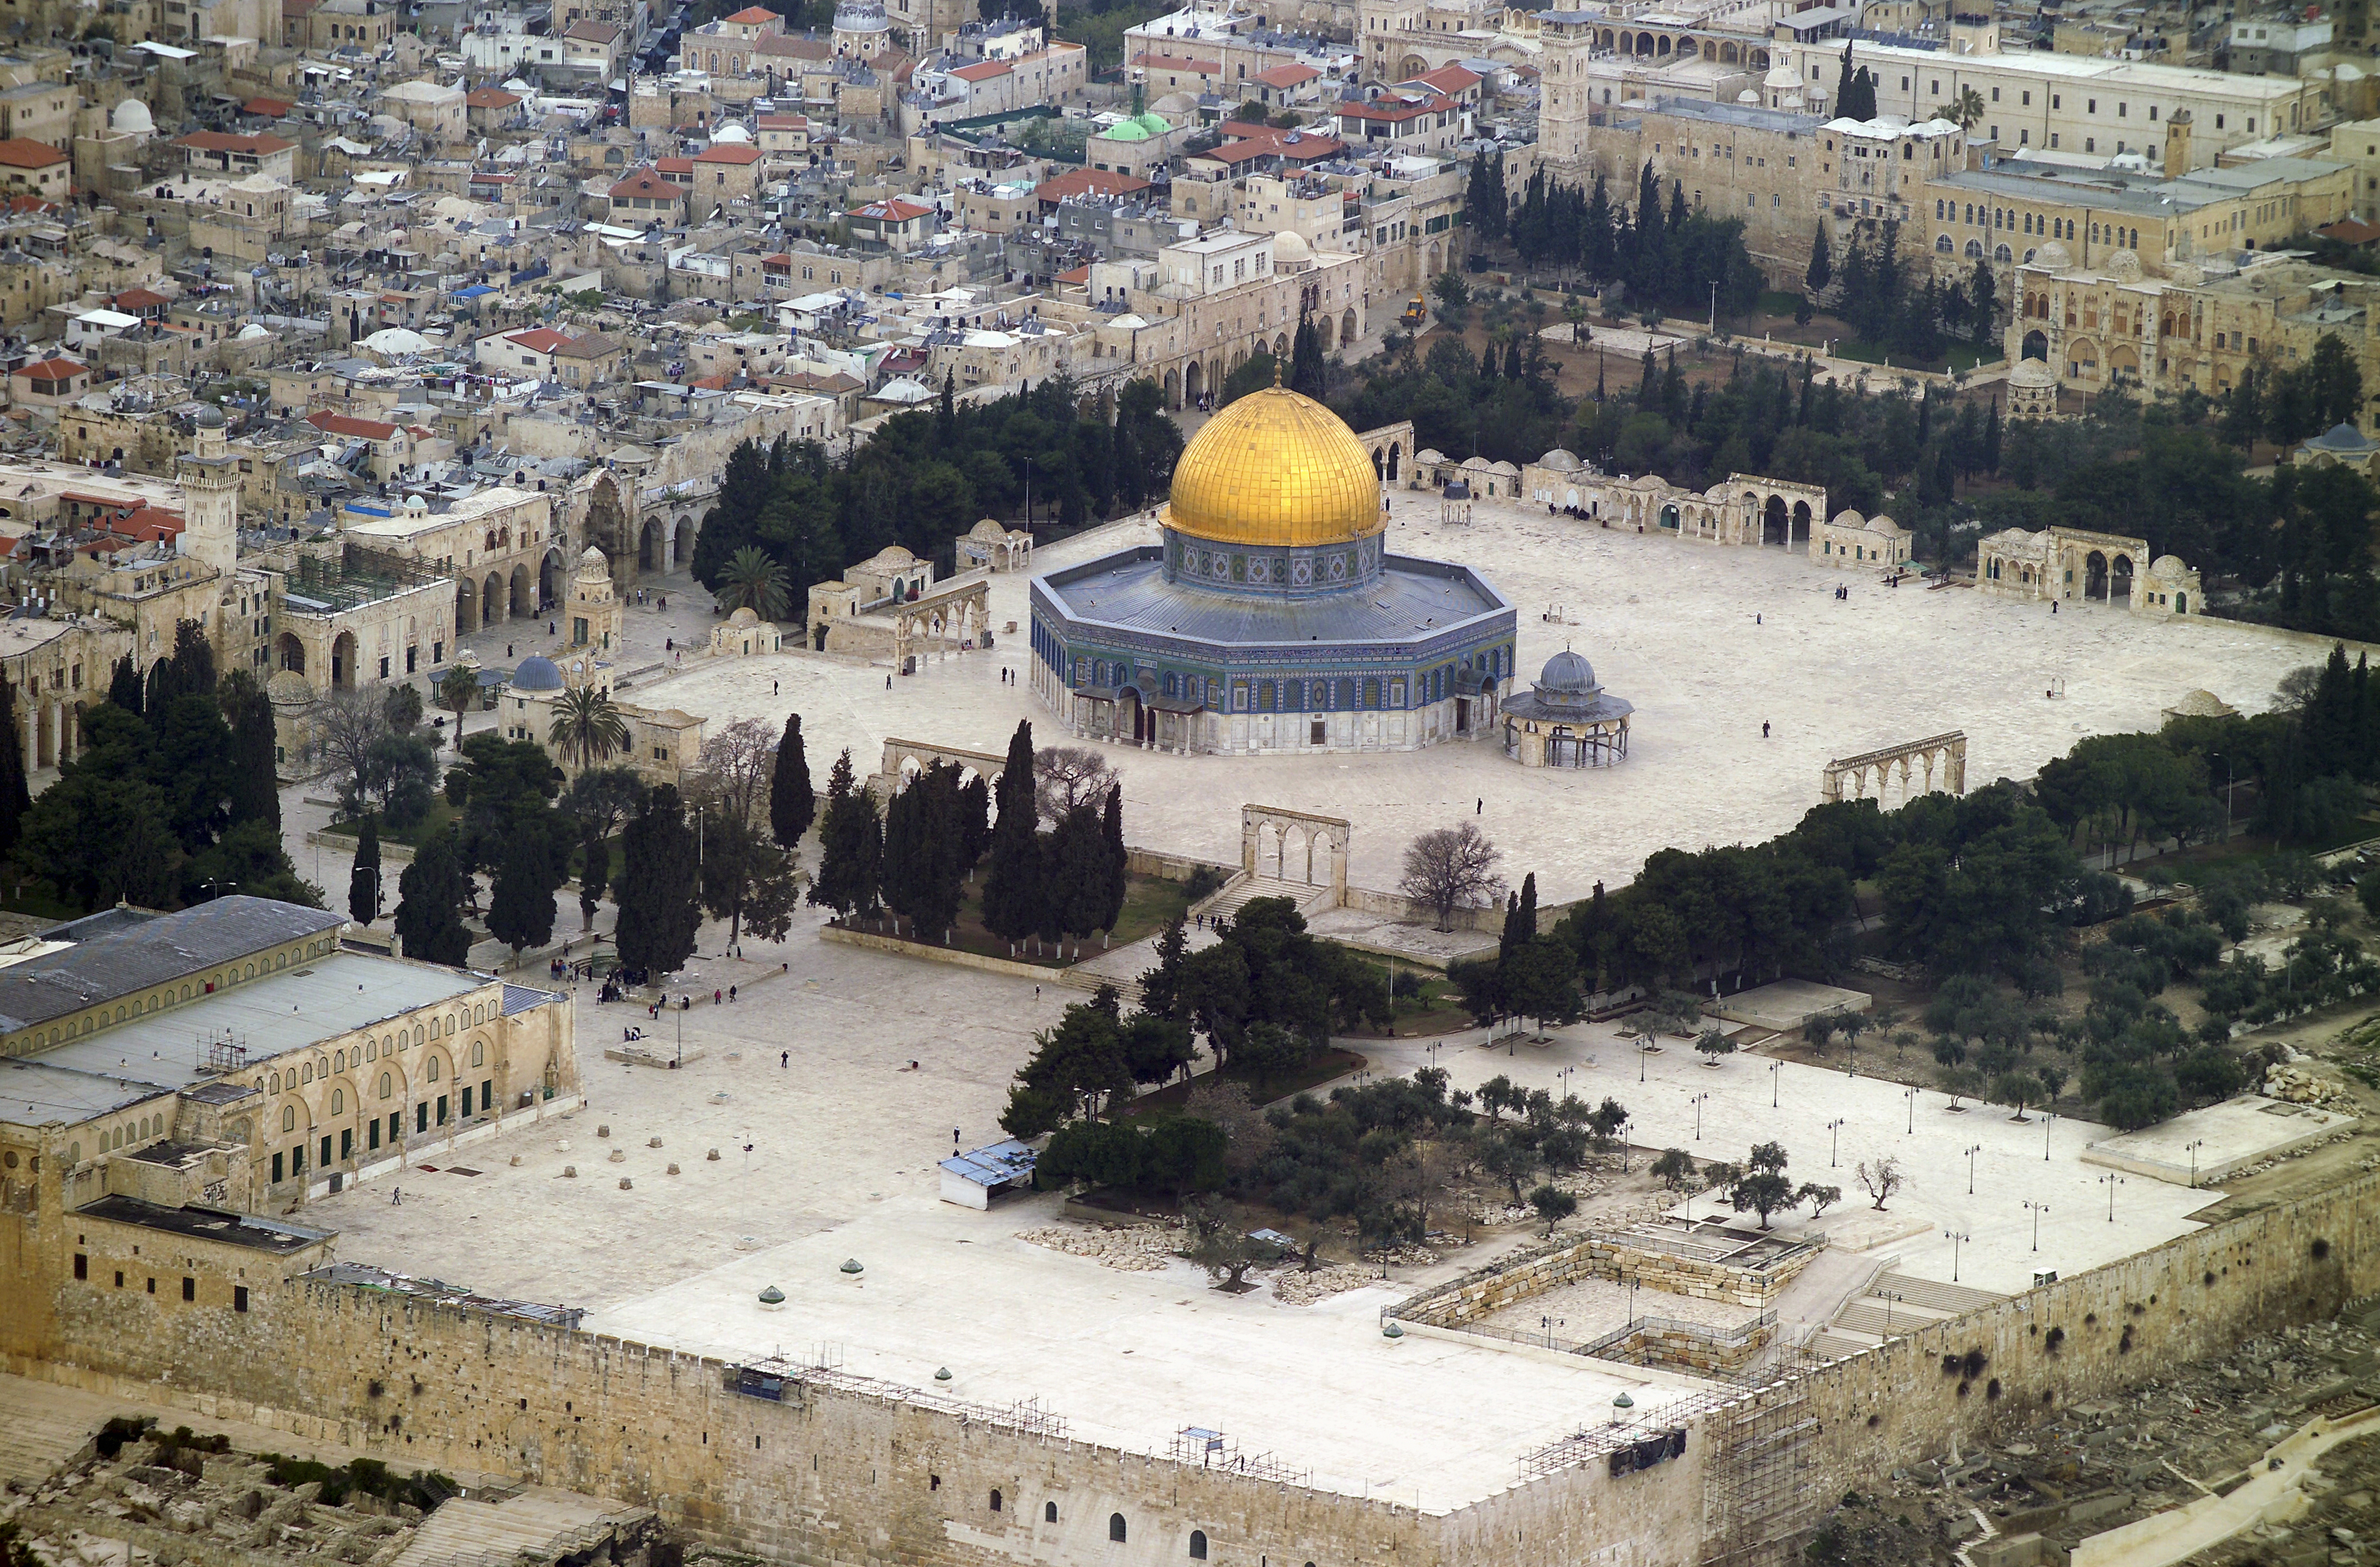 Aerial views of the Temple Mount and parts of the Old City of Jerusalem (2007)

https://en.wikipedia.org/wiki/Al-Aqsa#/media/File:Temple_Mount_(Aerial_view,_2007)_05.jpg